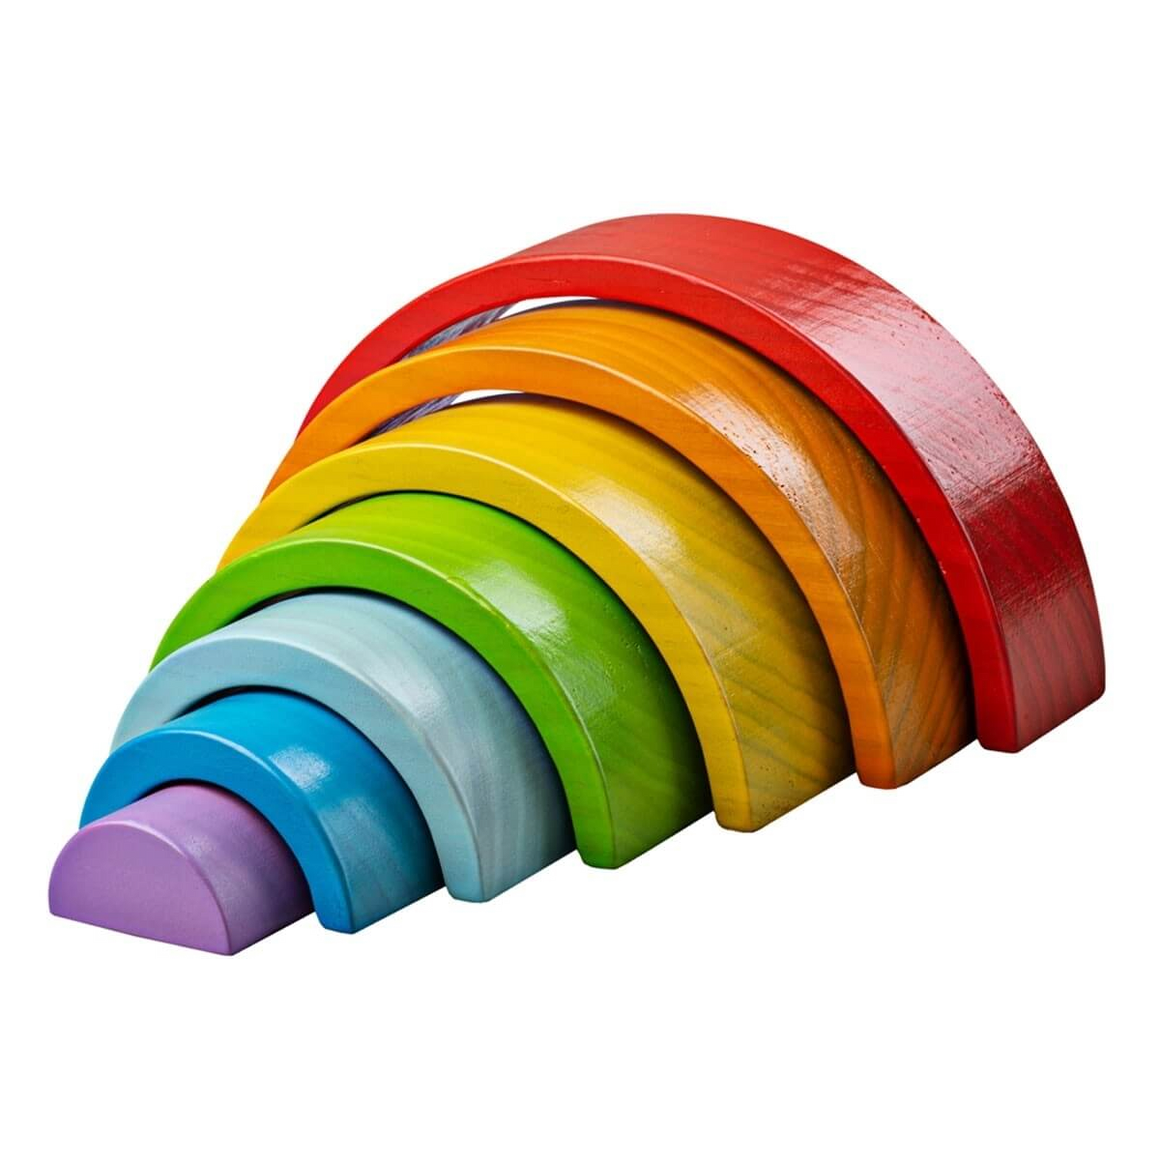 Wooden Stacking Rainbow- Small